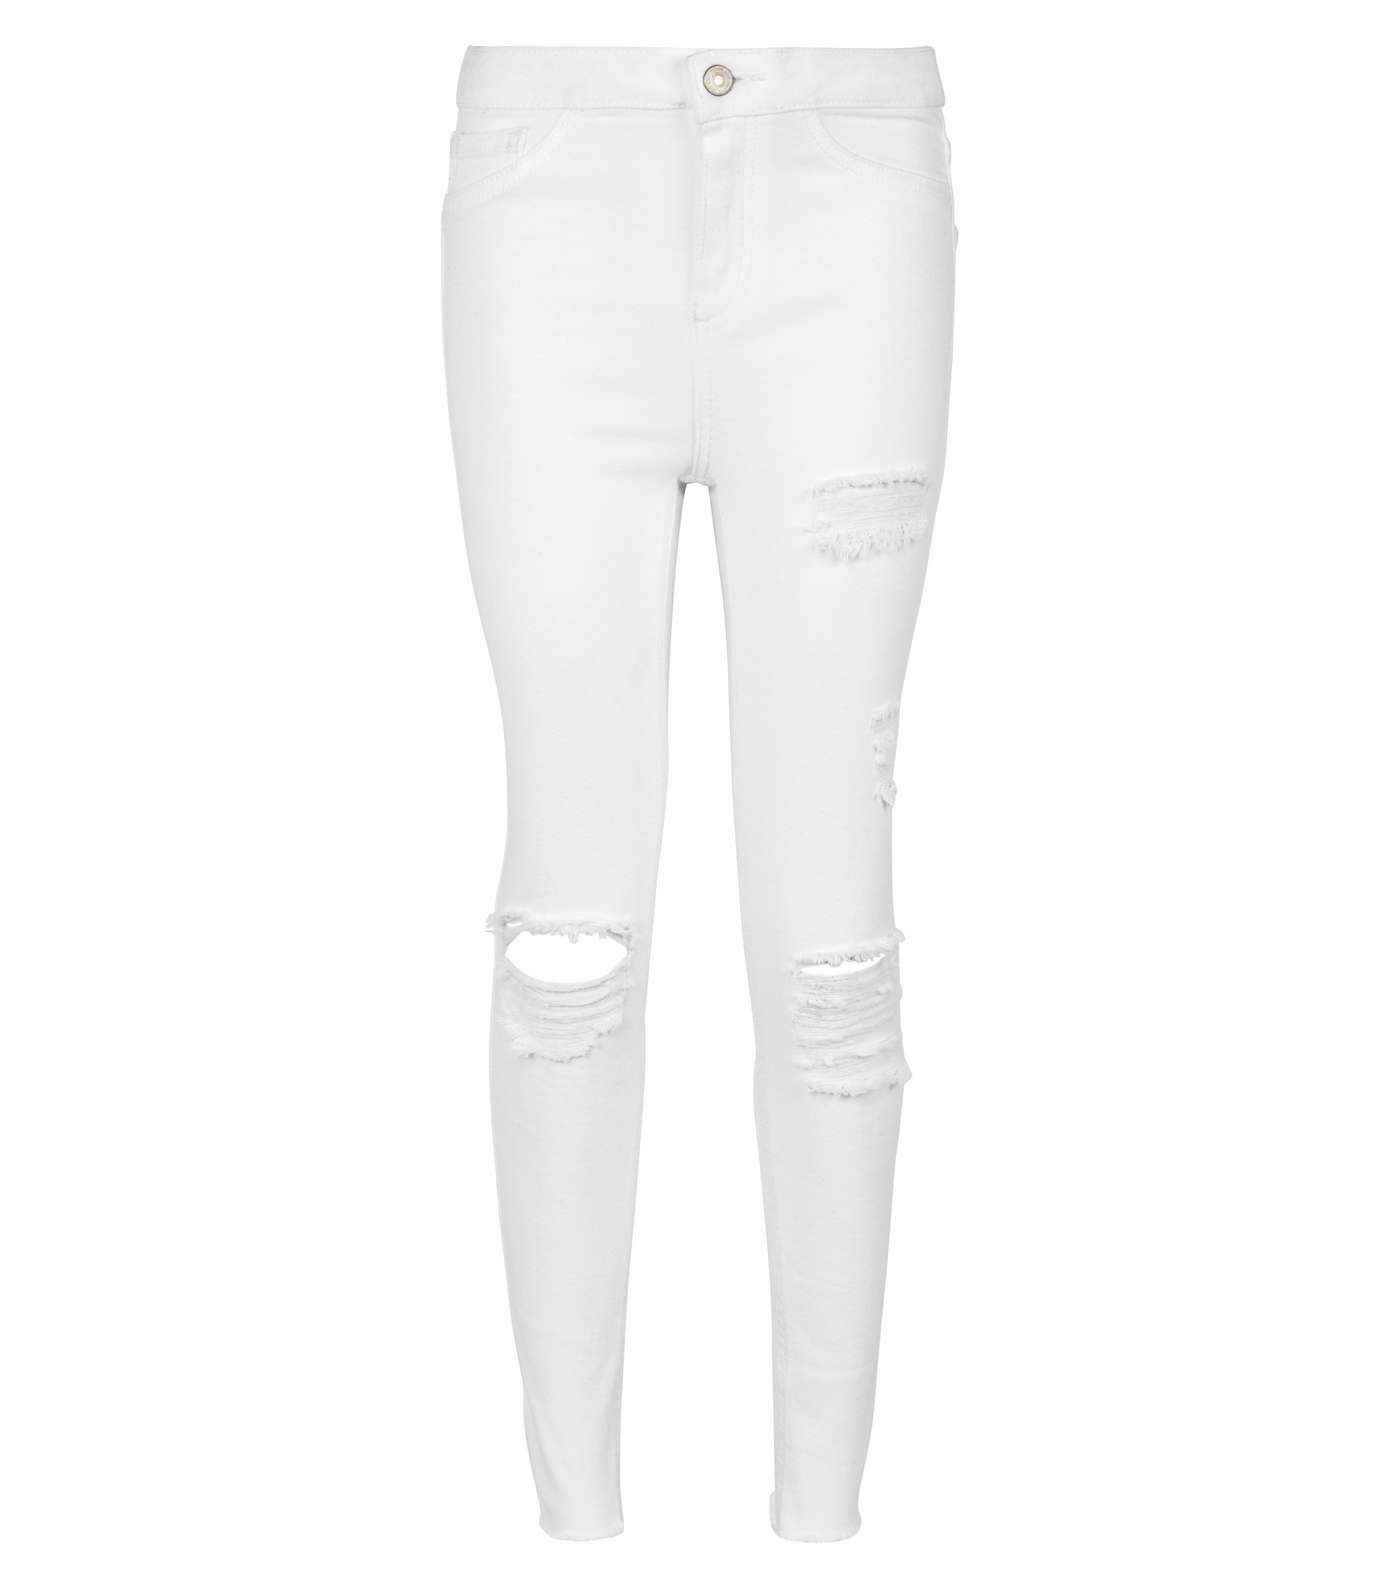 Girls White Ripped High Waist Skinny Jeans Image 4